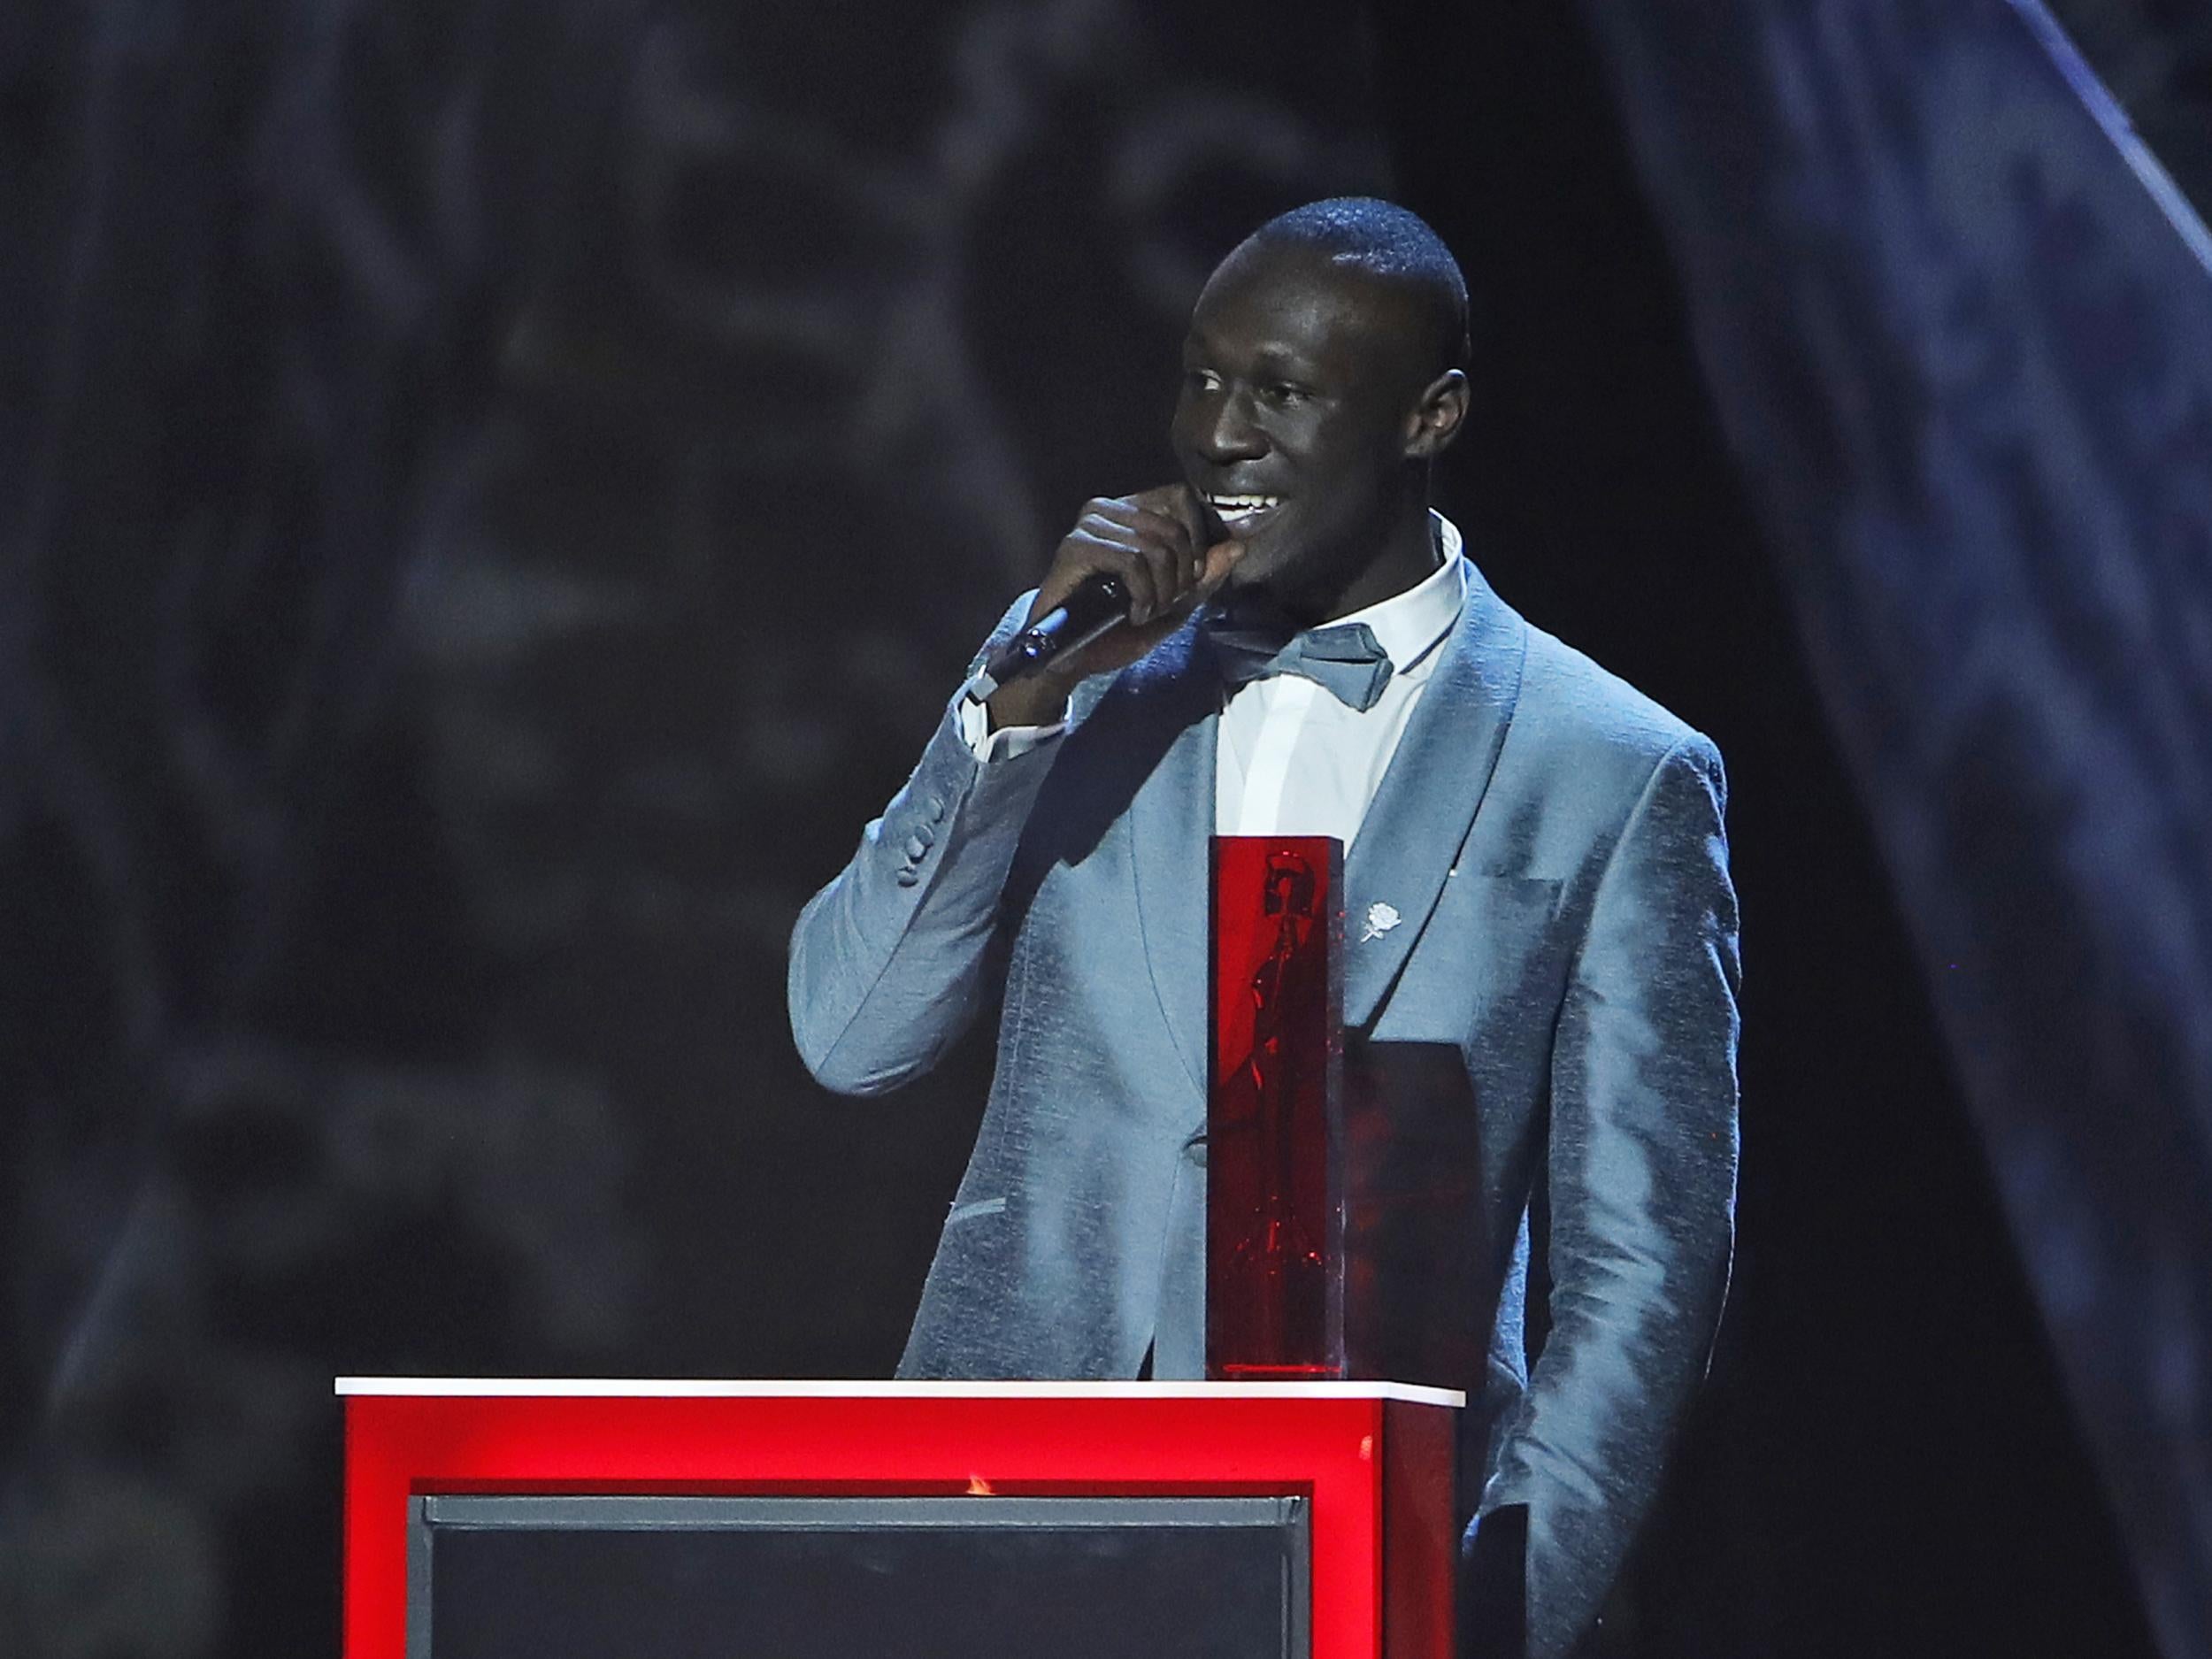 Stormzy’s powerful comments at the Brits about Grenfell struck a chord. I almost spilt my chamomile tea